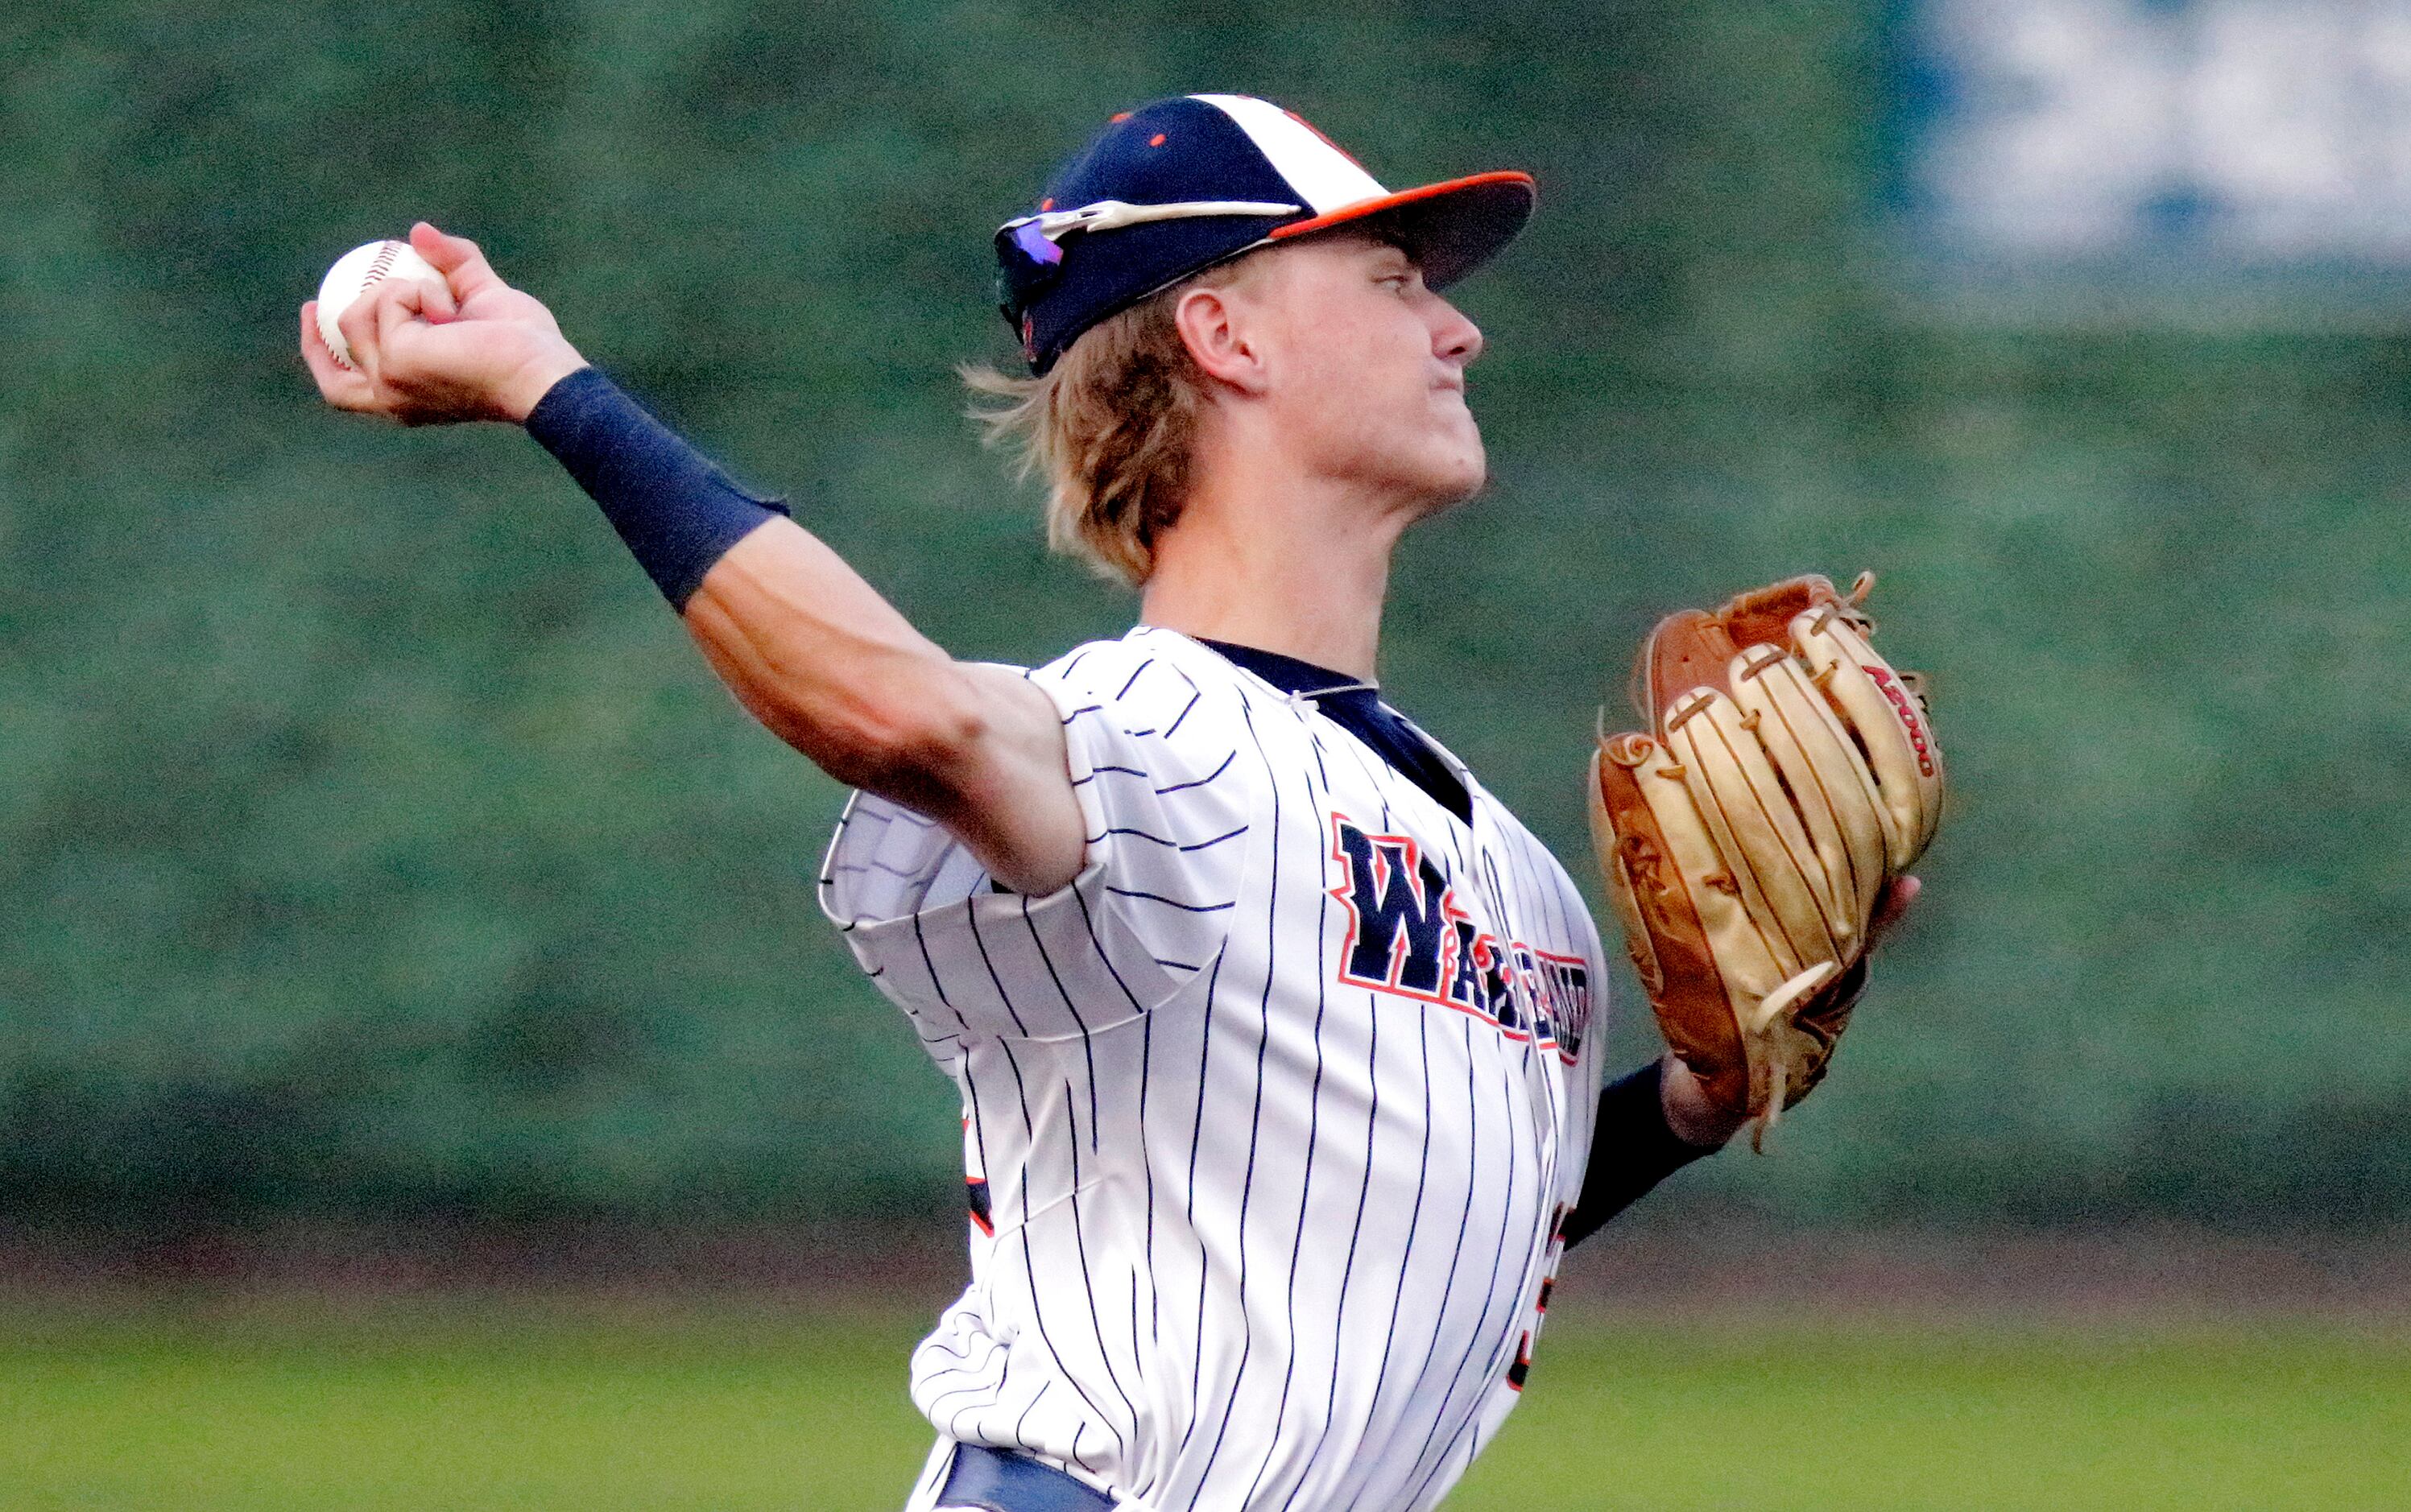 Wakeland High School shortstop Will Jameson (13) makes a throw for an out in the third...